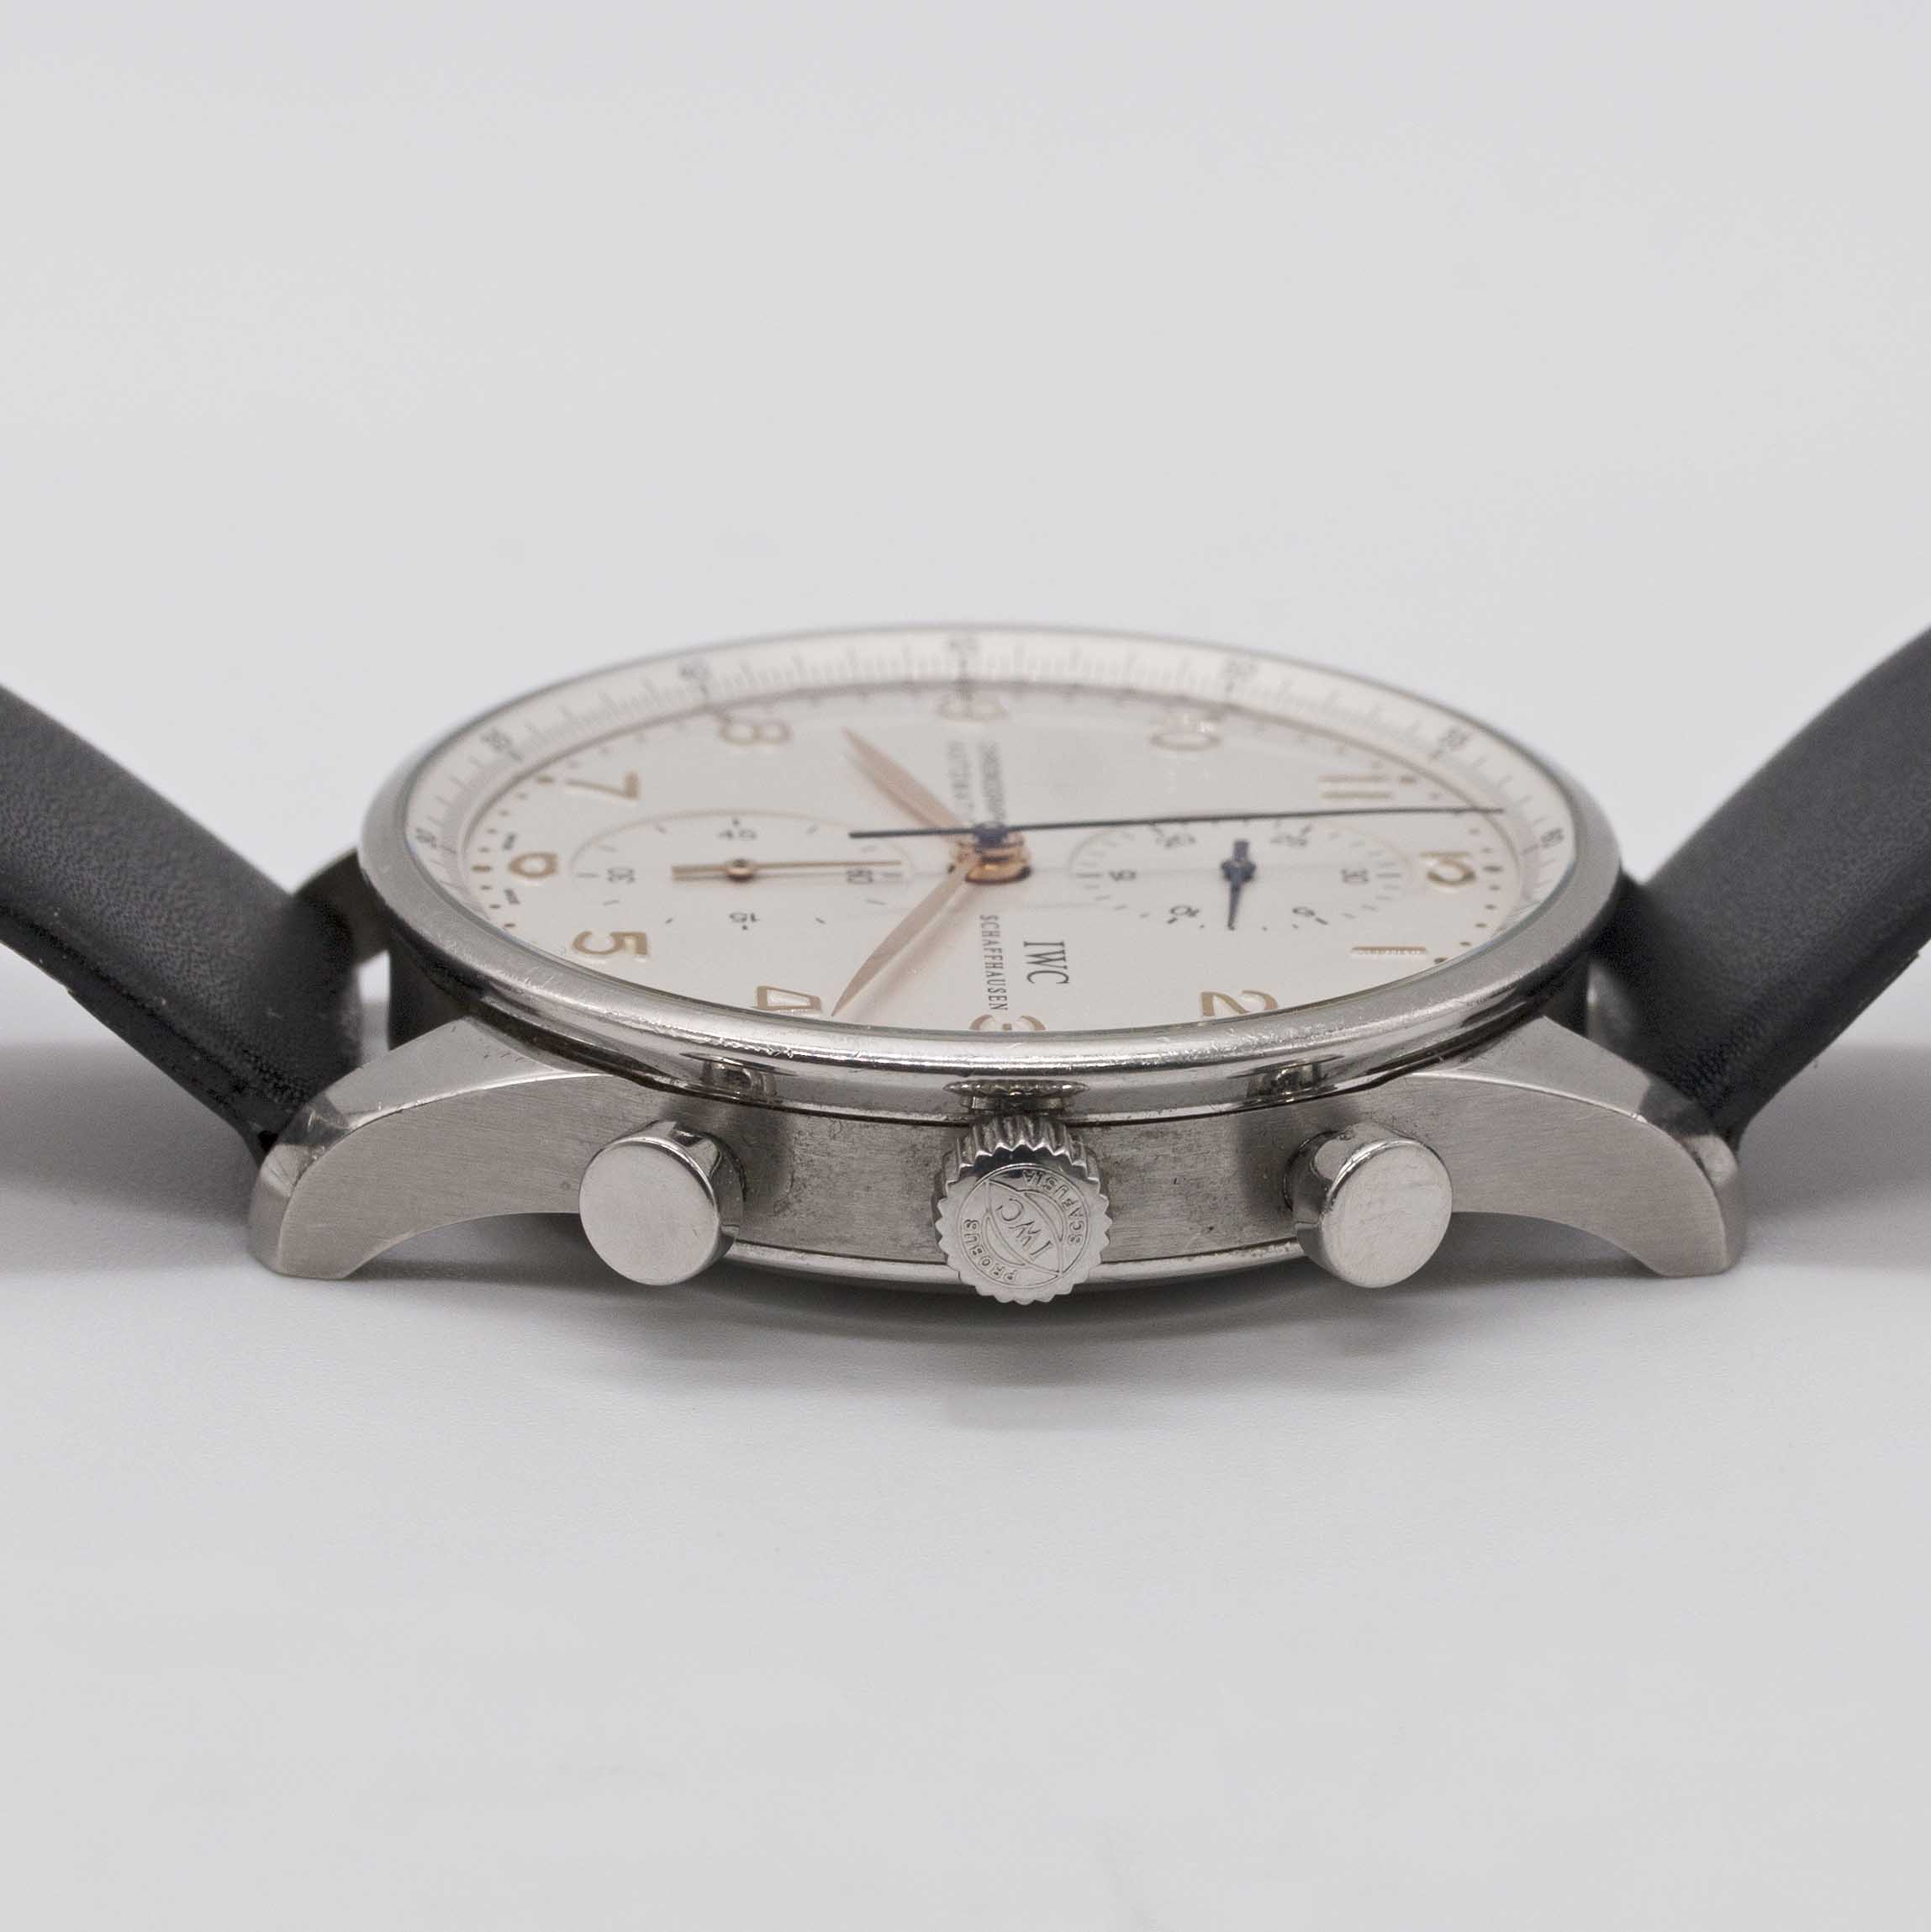 A GENTLEMAN'S STAINLESS STEEL IWC PORTUGUESE AUTOMATIC CHRONOGRAPH WRIST WATCH DATED 2007, REF. - Image 6 of 8